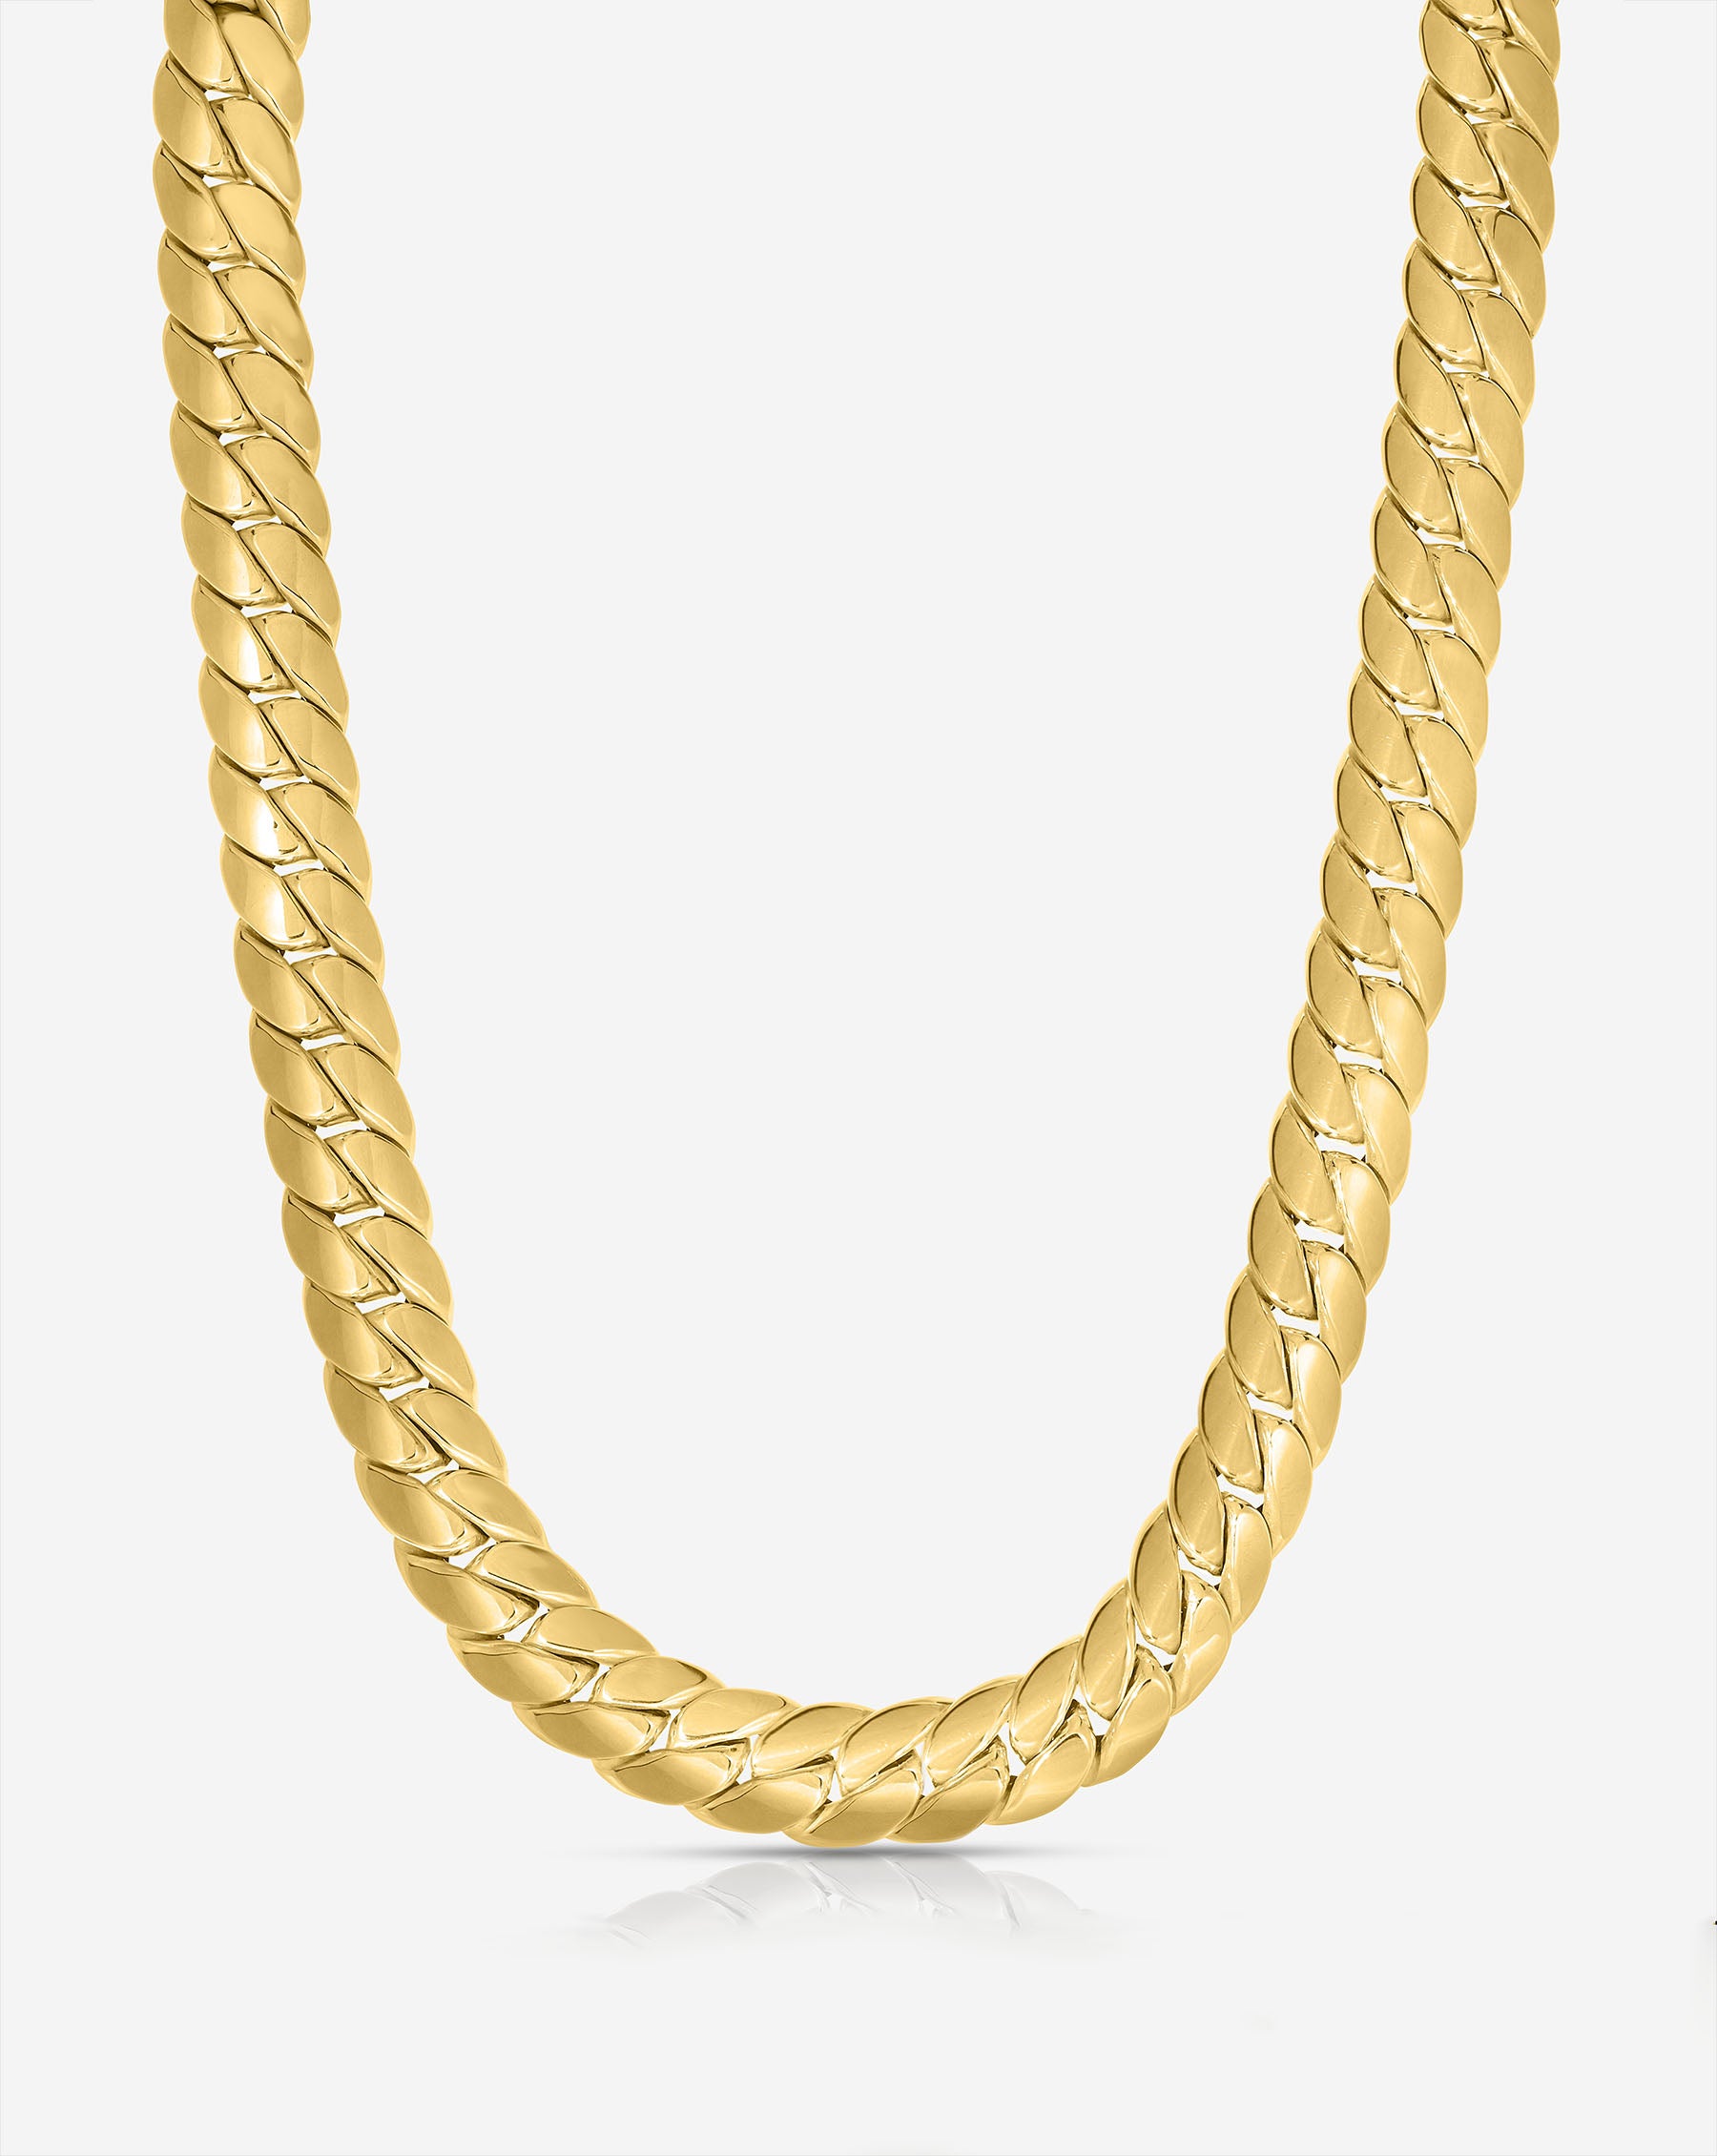 Gold Flat Snake Chain Necklace | Scream Pretty | Wolf & Badger